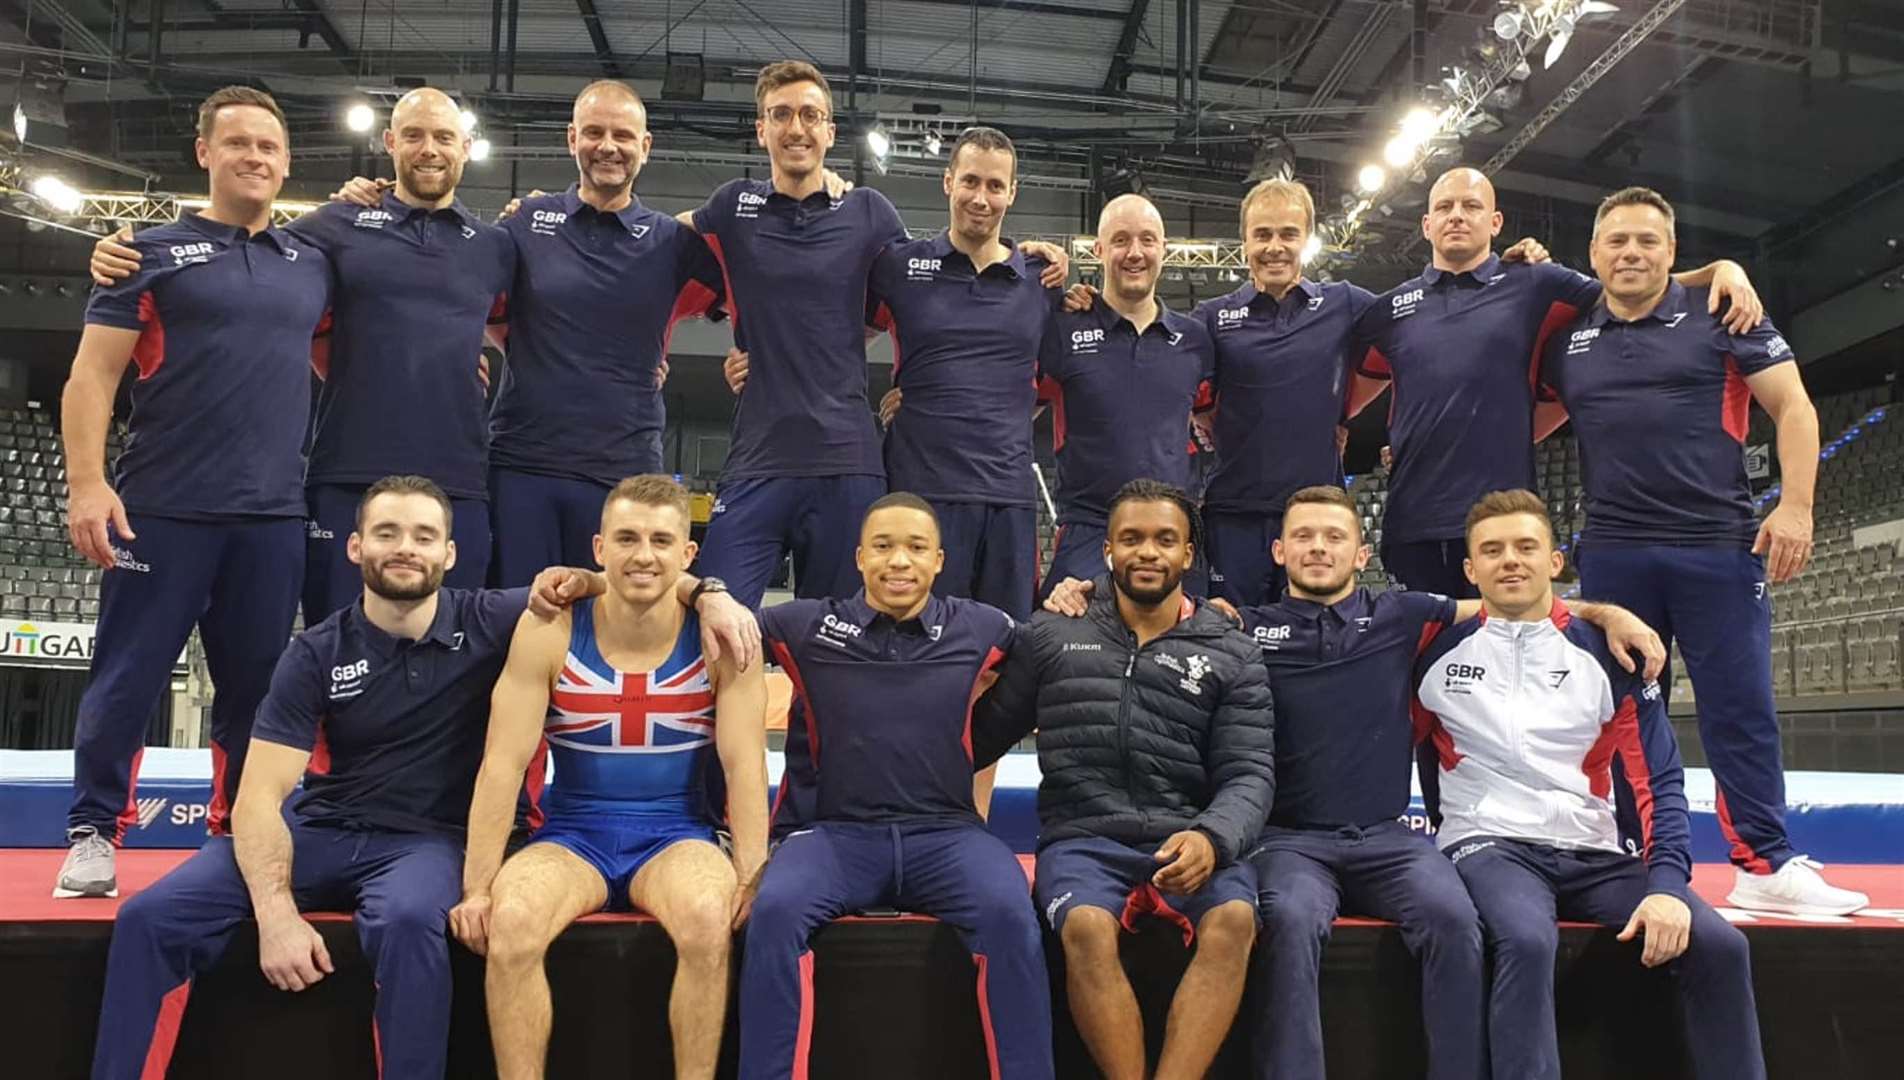 Success for Great Britain's men at the World Championships in Germany (18841536)